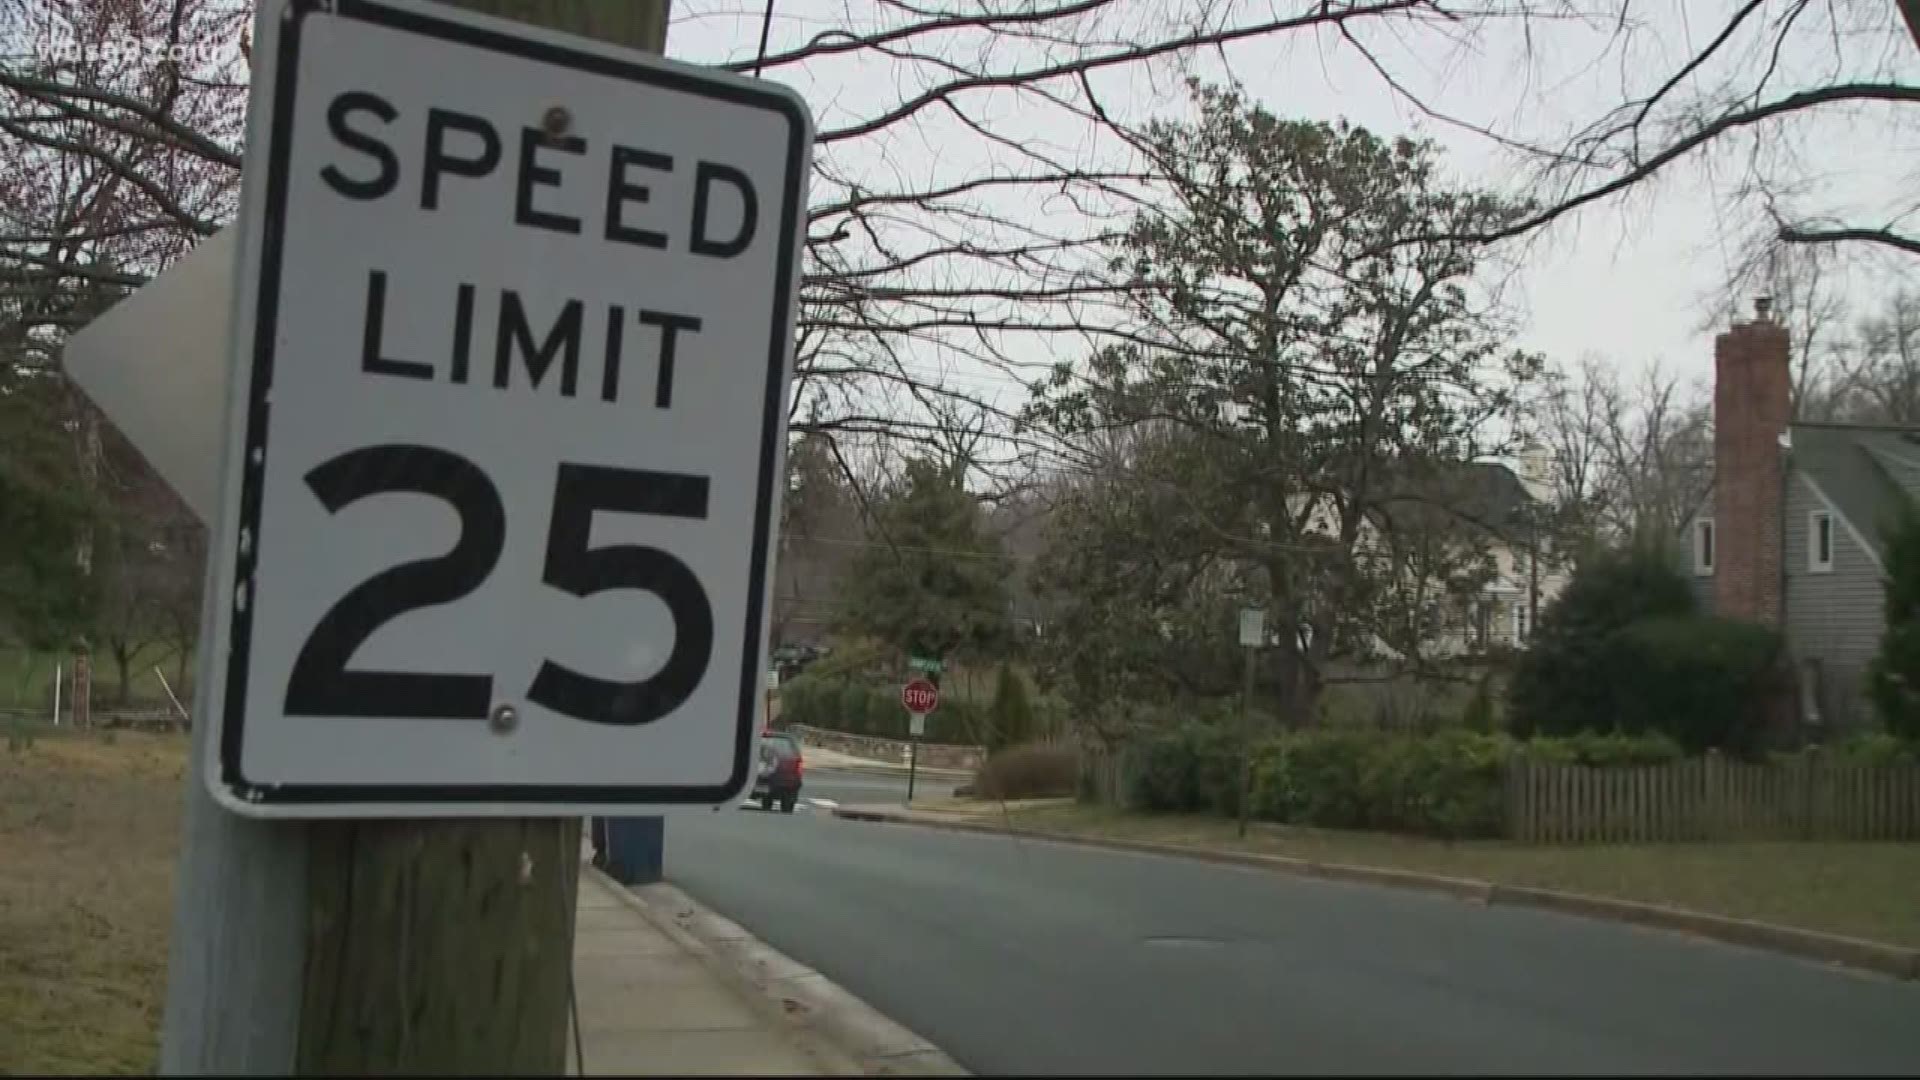 Mayor Justin Wilson is asking city planners to look at possibly increasing speeding fines in residential areas to deal with traffic issues.